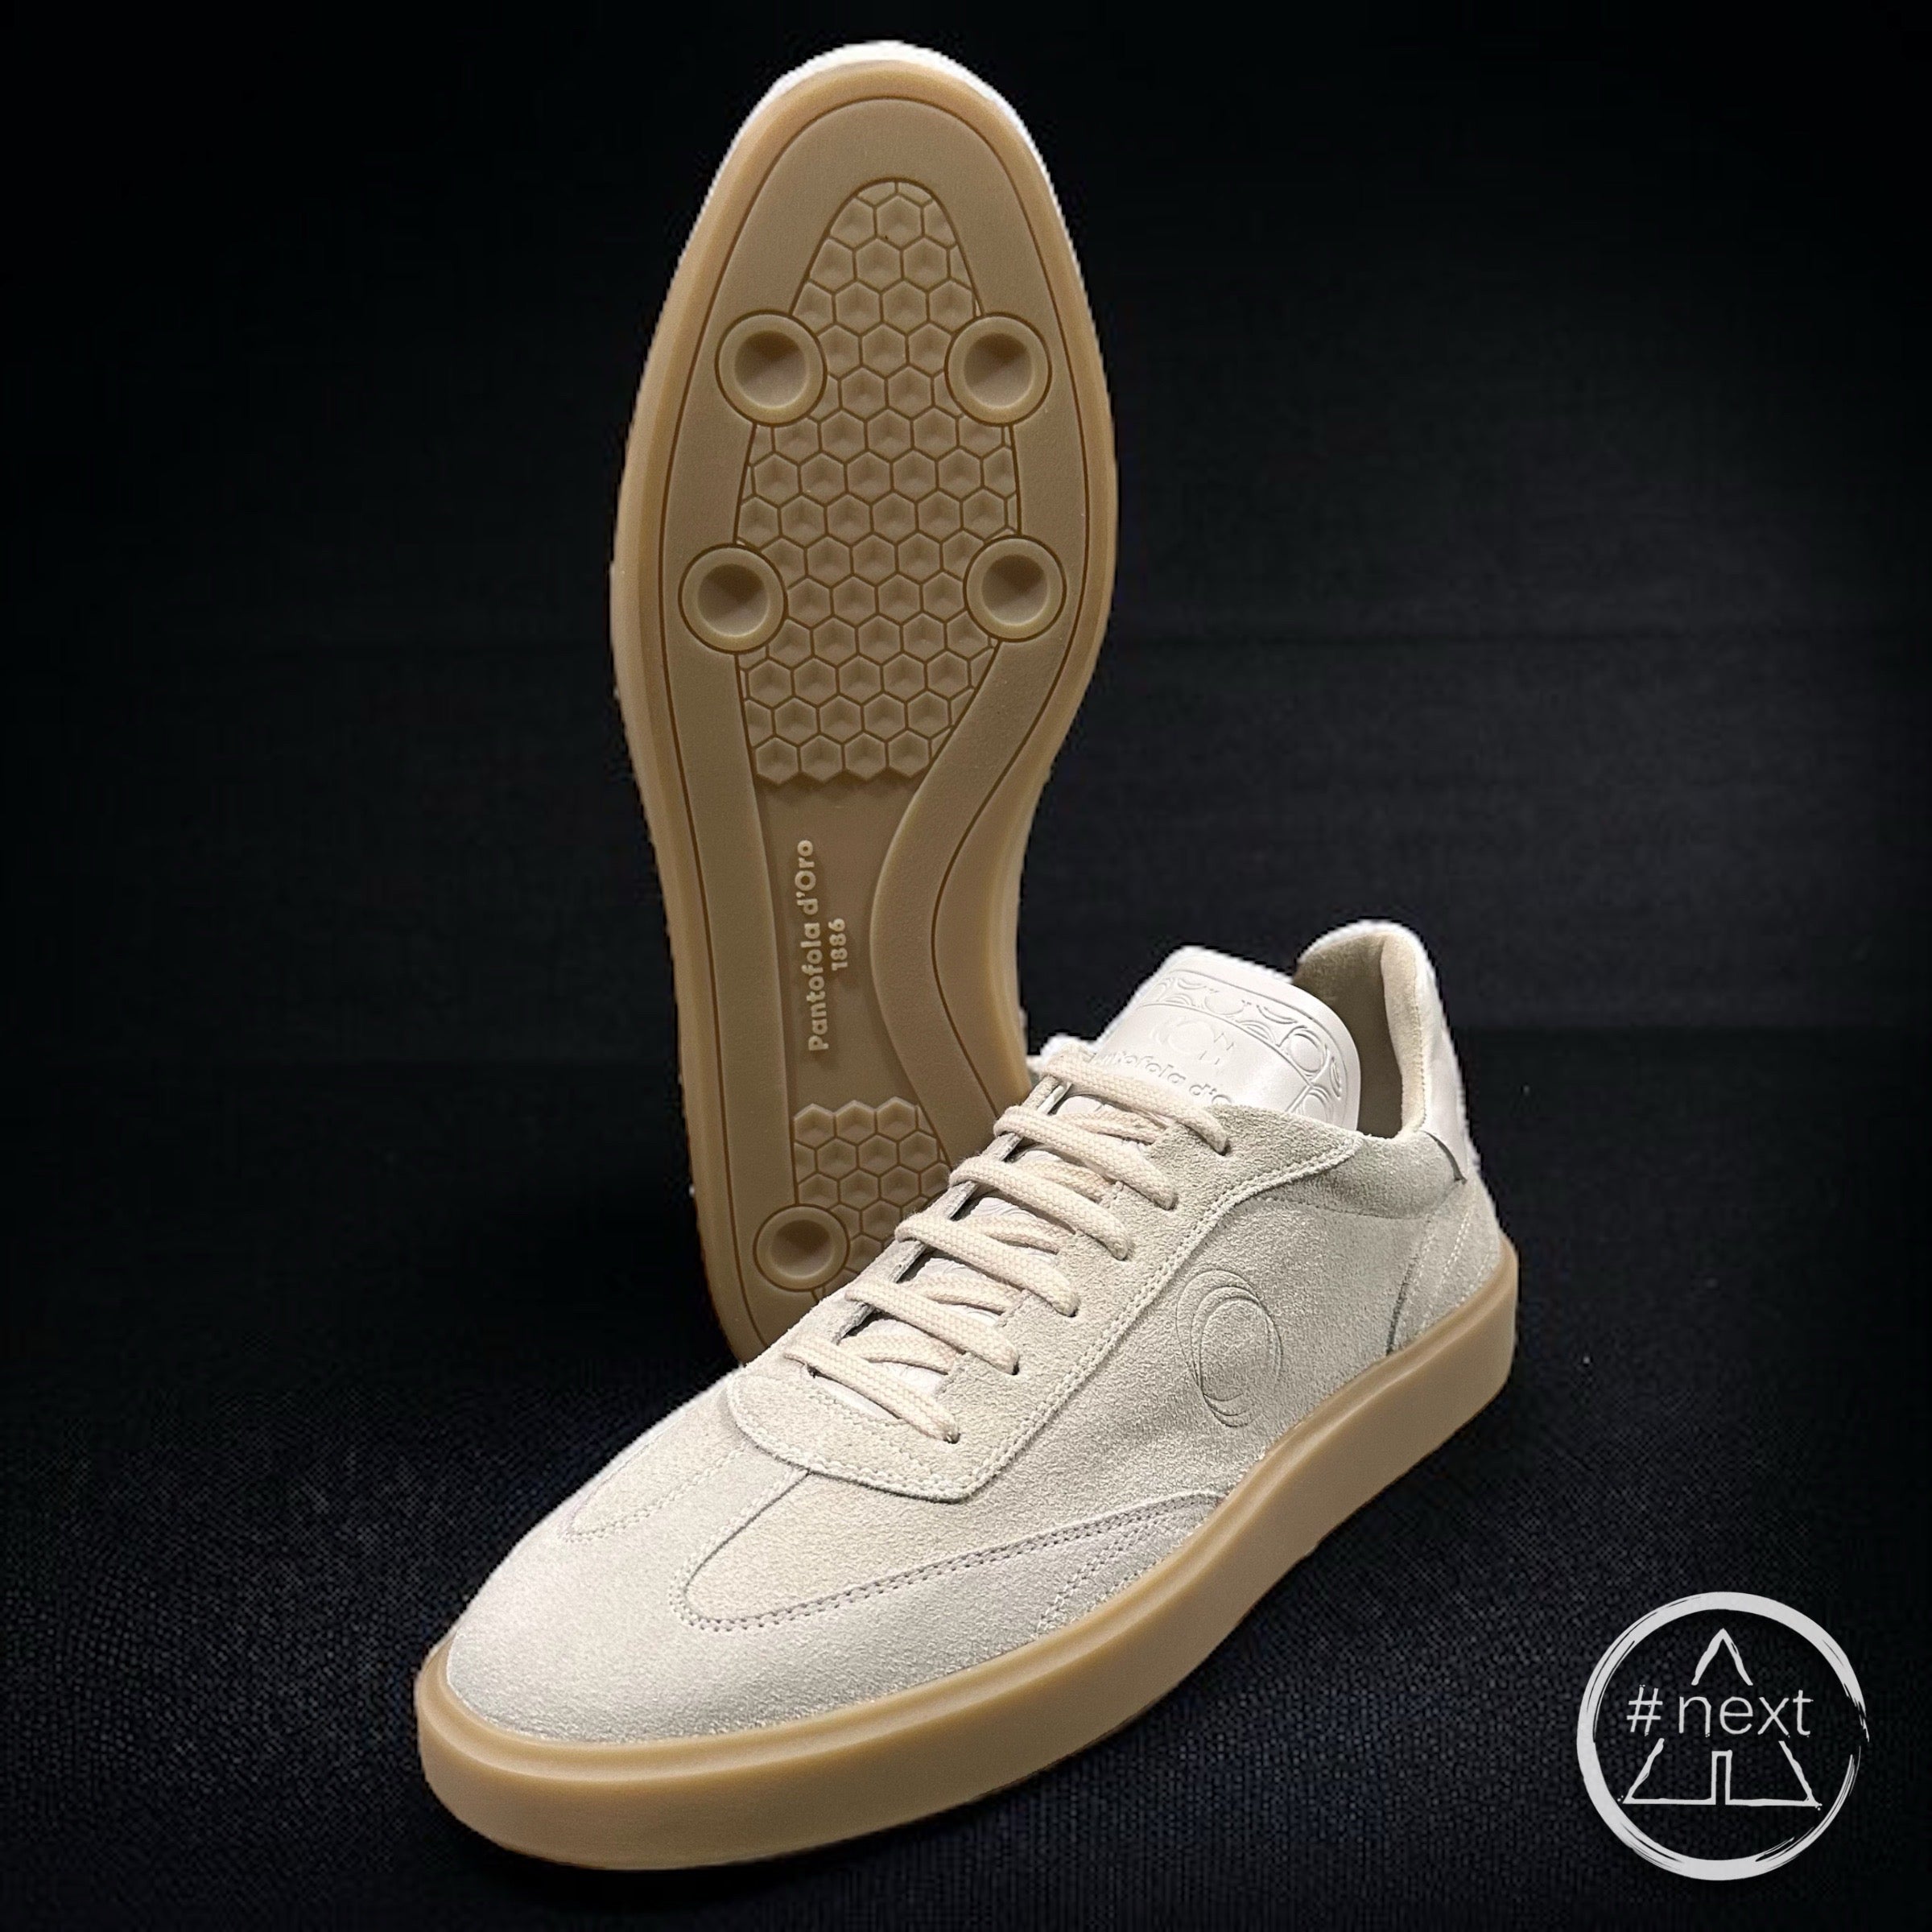 #TAKEBACK - Pantofola D'Oro - Sneakers League - Mastice off white. - ANDY #NEXT